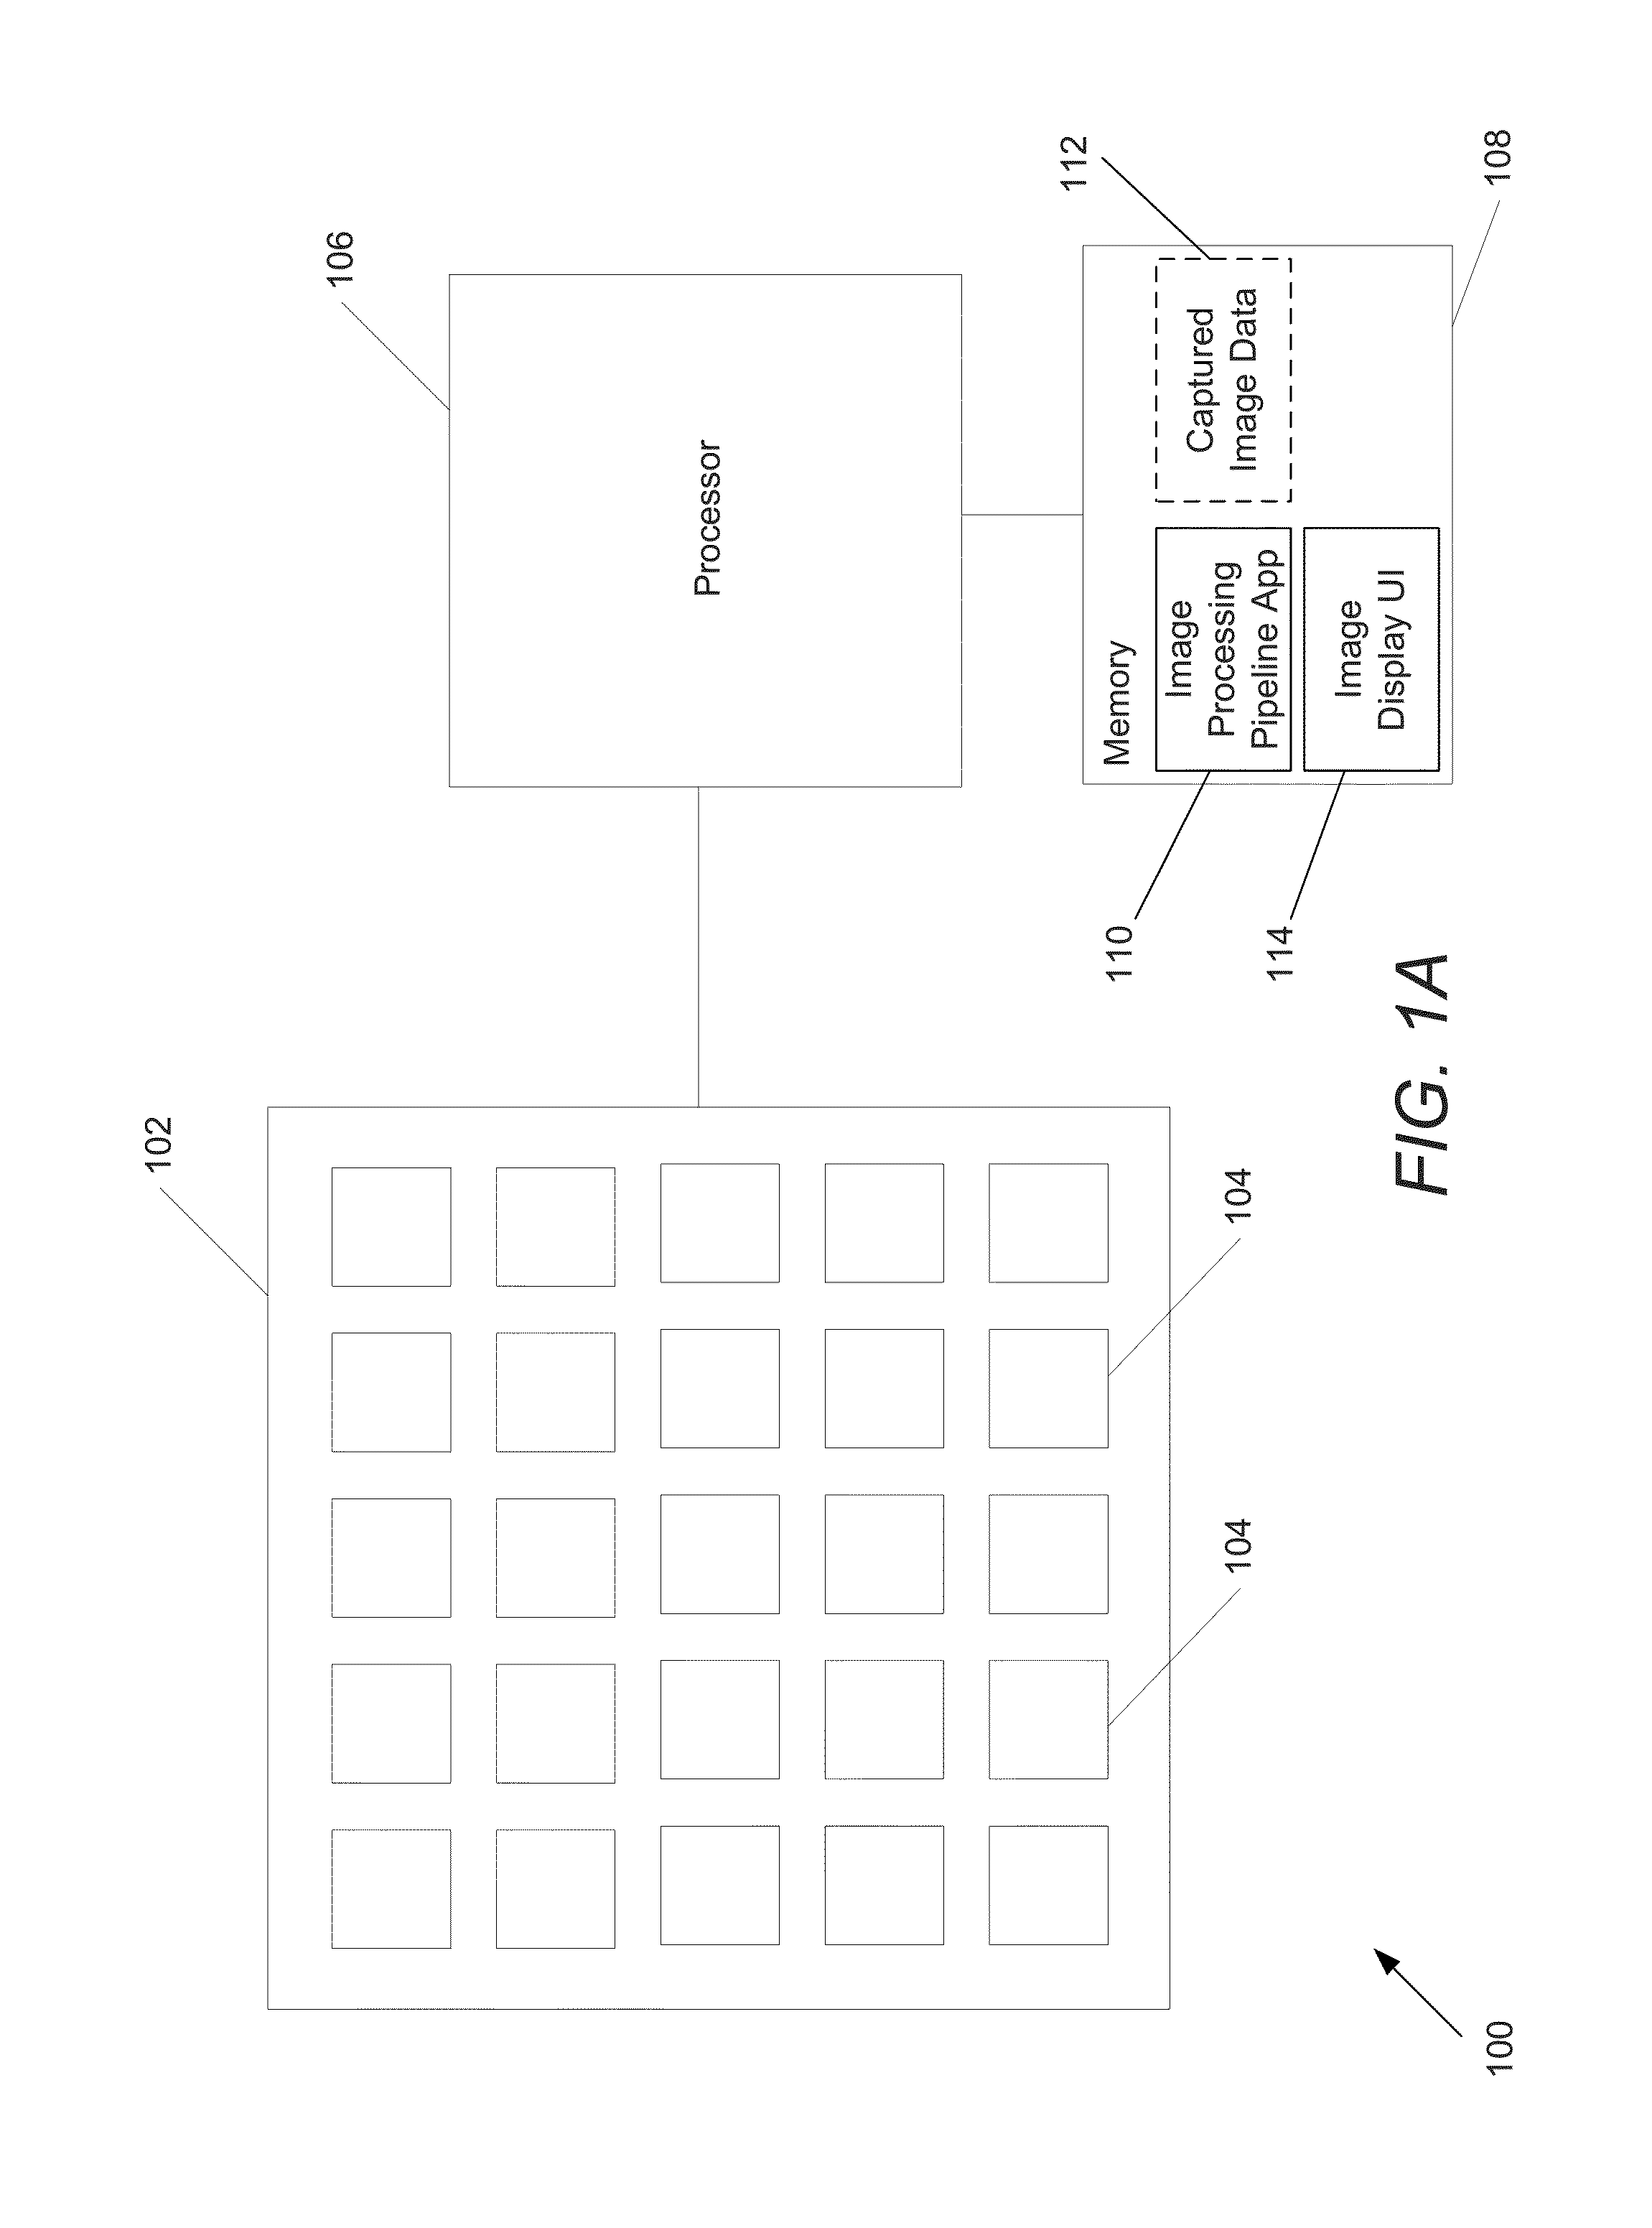 System and methods for depth regularization and semiautomatic interactive matting using rgb-d images